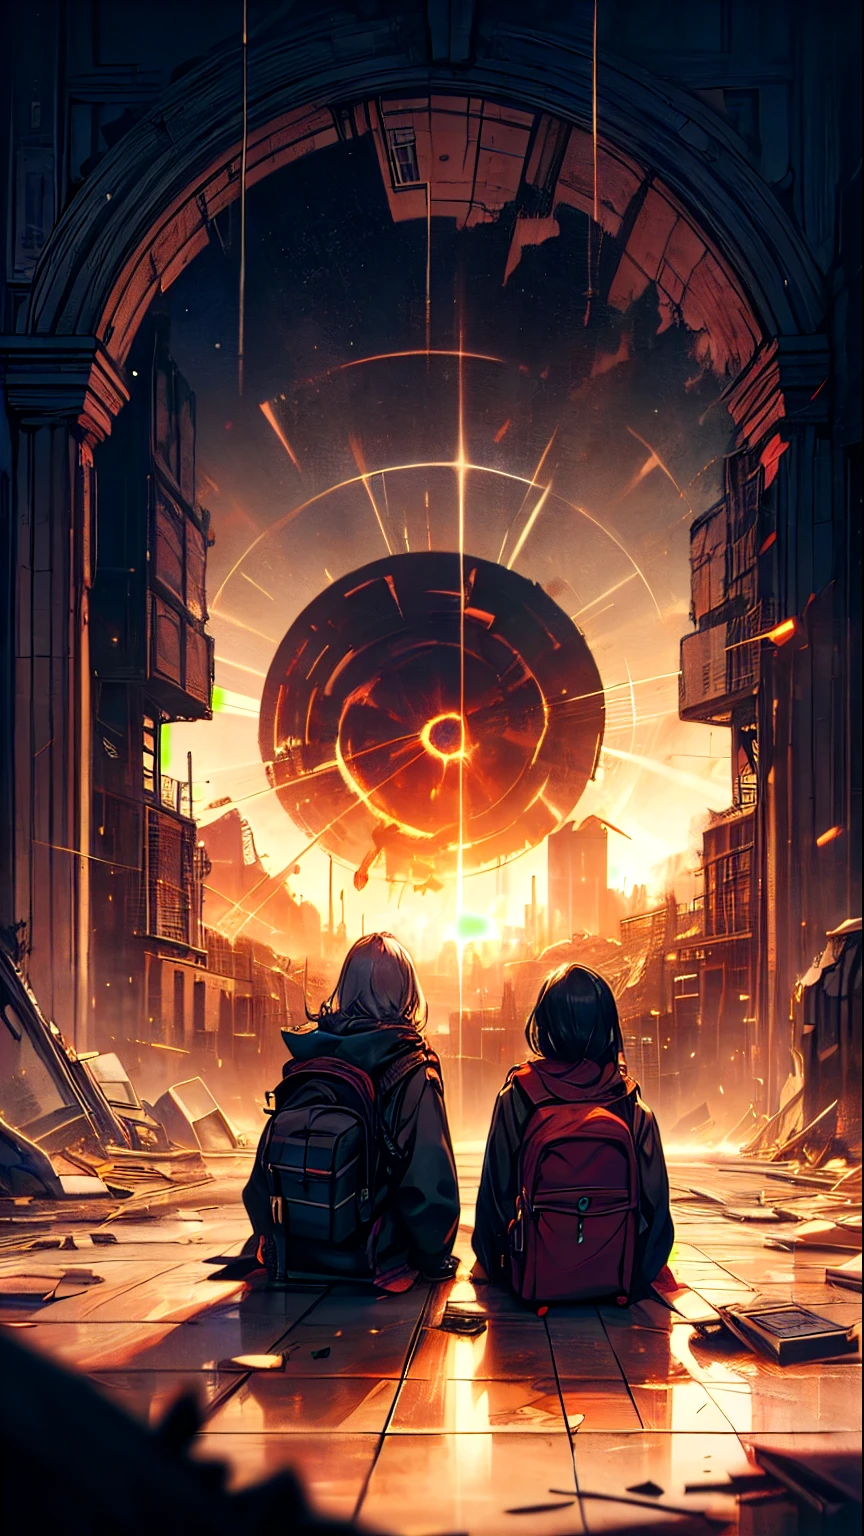 (best quality, highres, ultra-detailed), 2 people lying down, destroyed building, hole in side of building, looking out at landscape, large explosion in background, backpack on ground, damaged building, hauntingly beautiful, surreal, post-apocalyptic, dark color palette, natural lighting